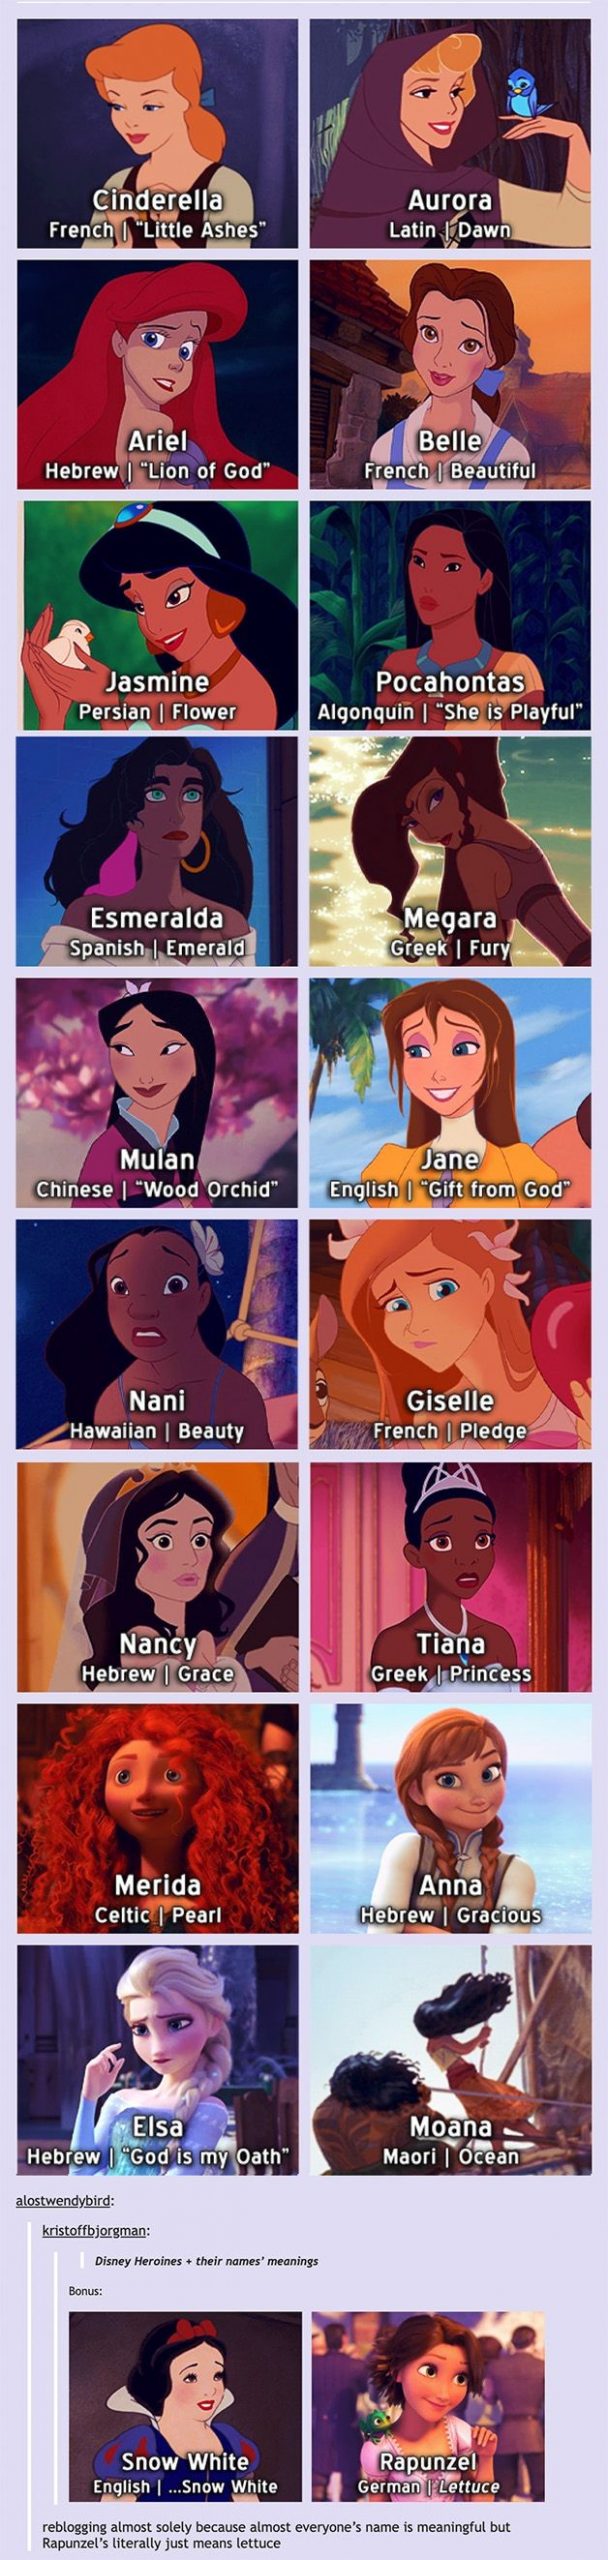 The Hidden Meanings Behind Disney Princess Names | Daily Infographic